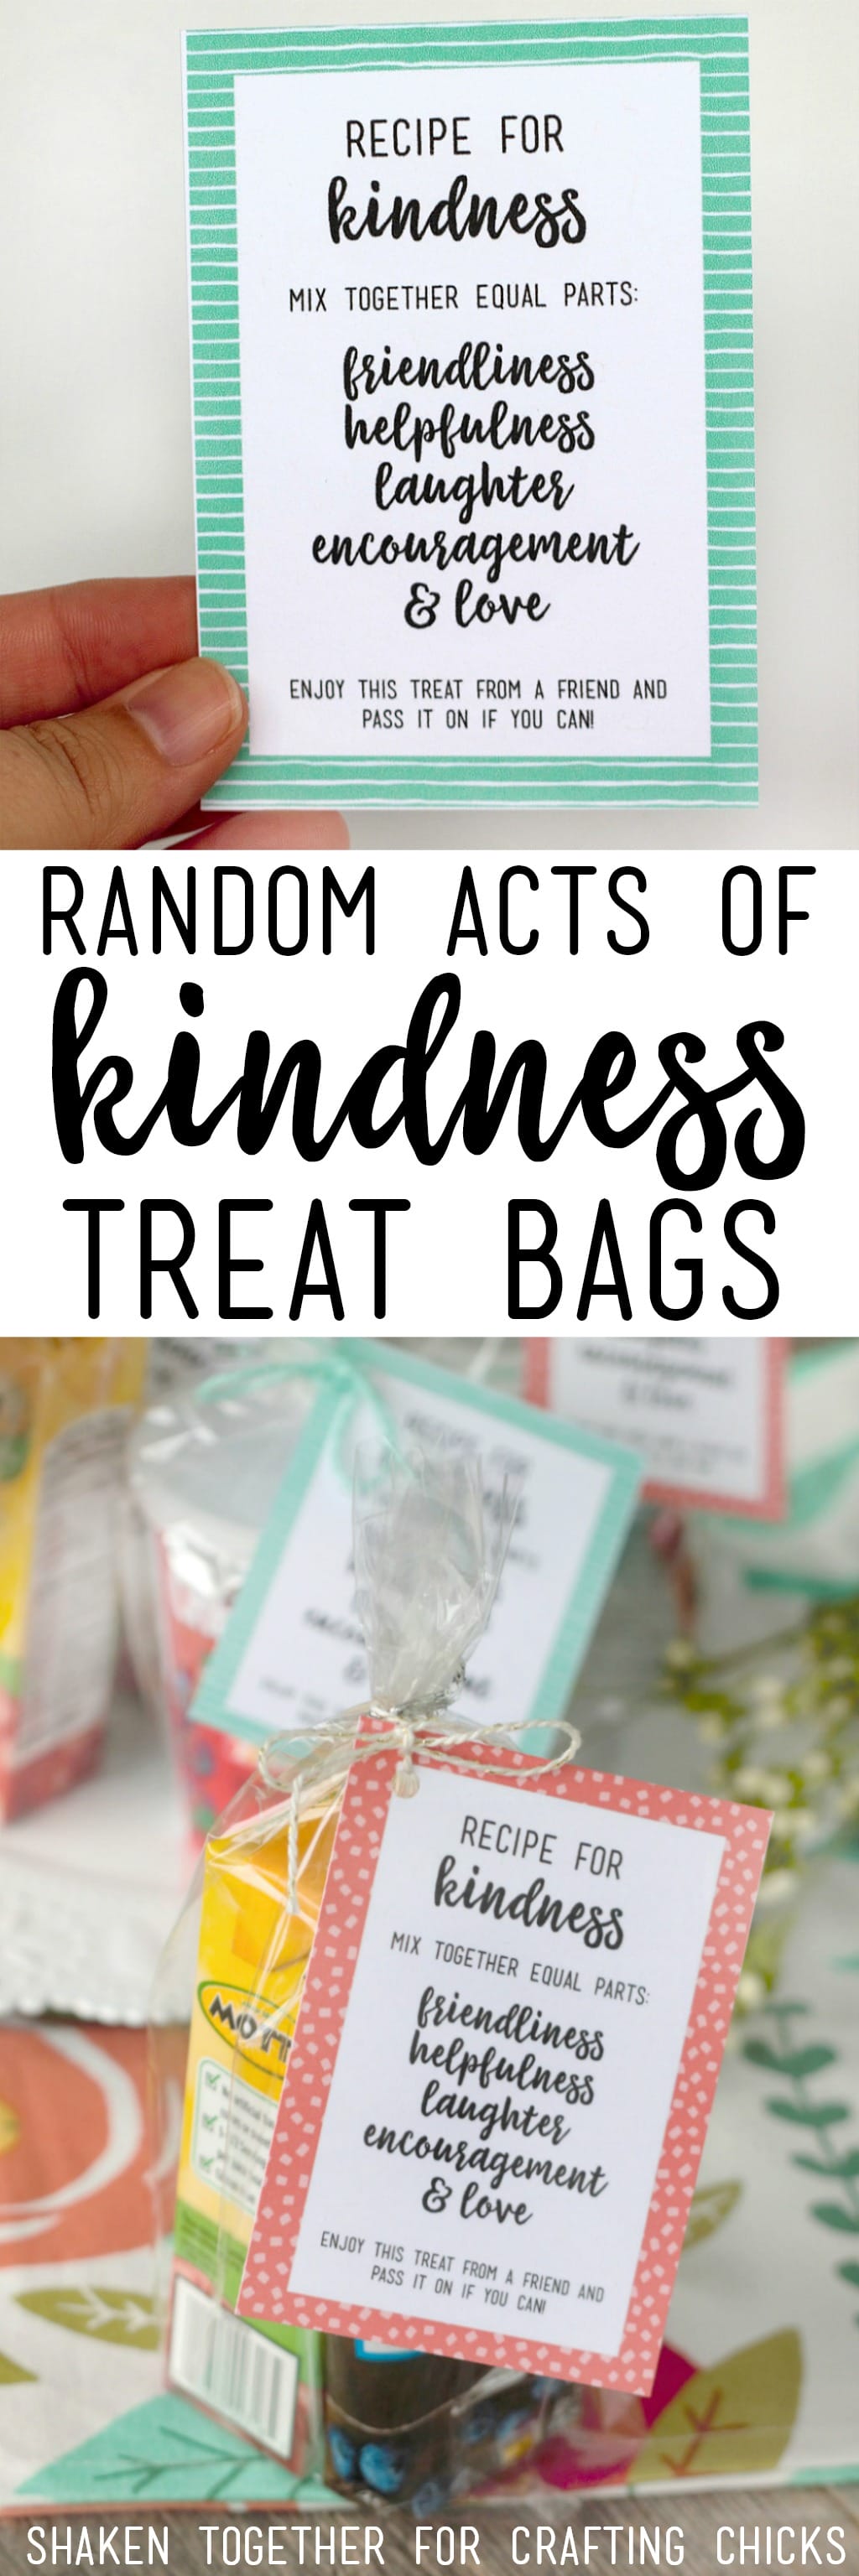 Encourage generosity and kindness in children with these Recipe for Kindness Random Acts of Kindness Treat Bags! Tons of ideas for bag fillers and printable tags, too!